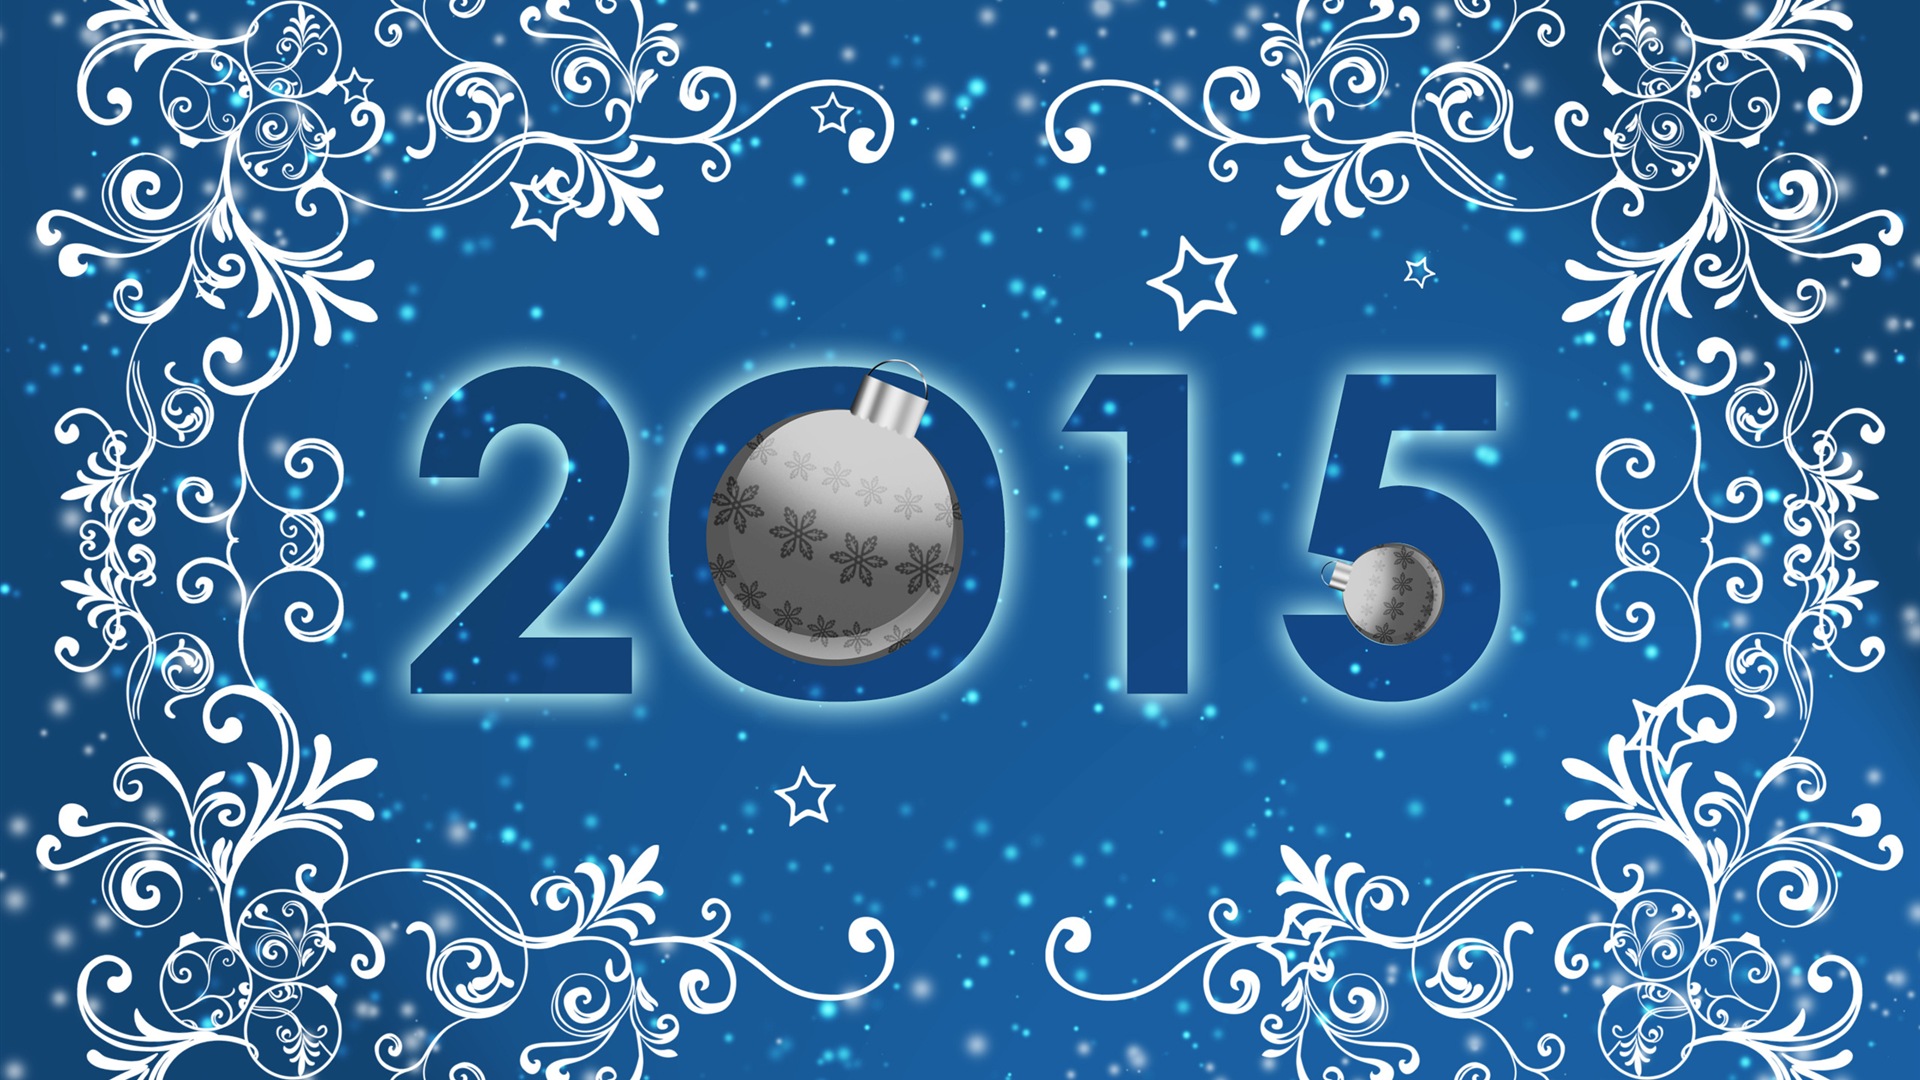 2015 New Year theme HD wallpapers (1) #8 - 1920x1080